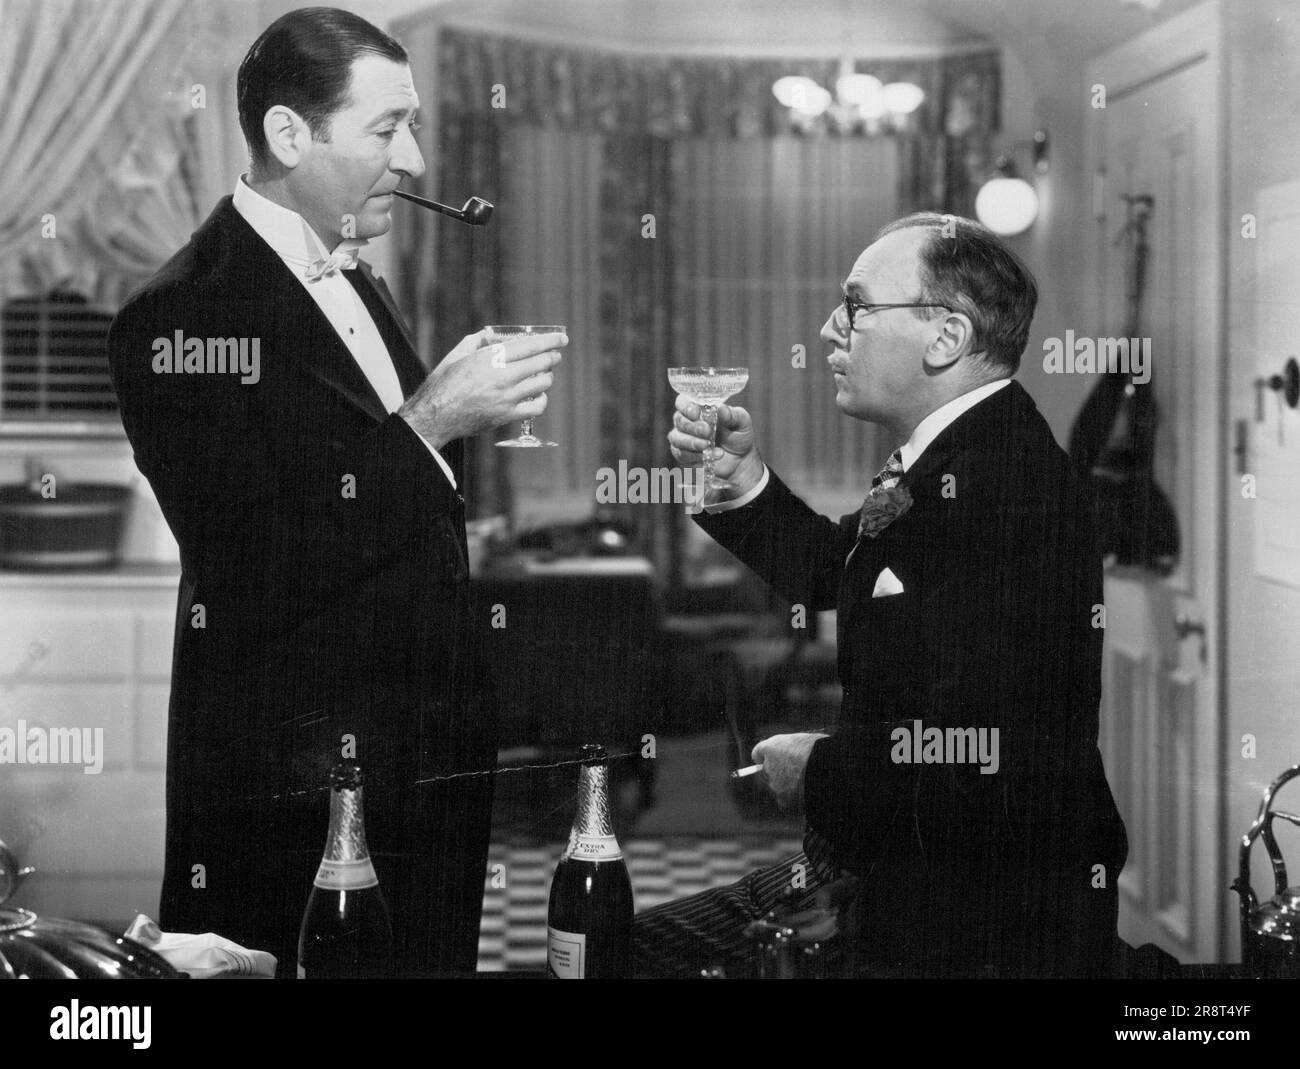 Arthur Treacher and Roland Young Are Shown Here in a Scene From RKO Radio's 'Irene,' delightful comedy with music starring Anna Neagle in the tuitle role. Ray Milland, Alan Marshal, Young, May Robson, Billie Burke and Treacher are featured in this screen version of the Smash-hit stage production which created a sensation on Broadway. November 12, 1940. Stock Photo